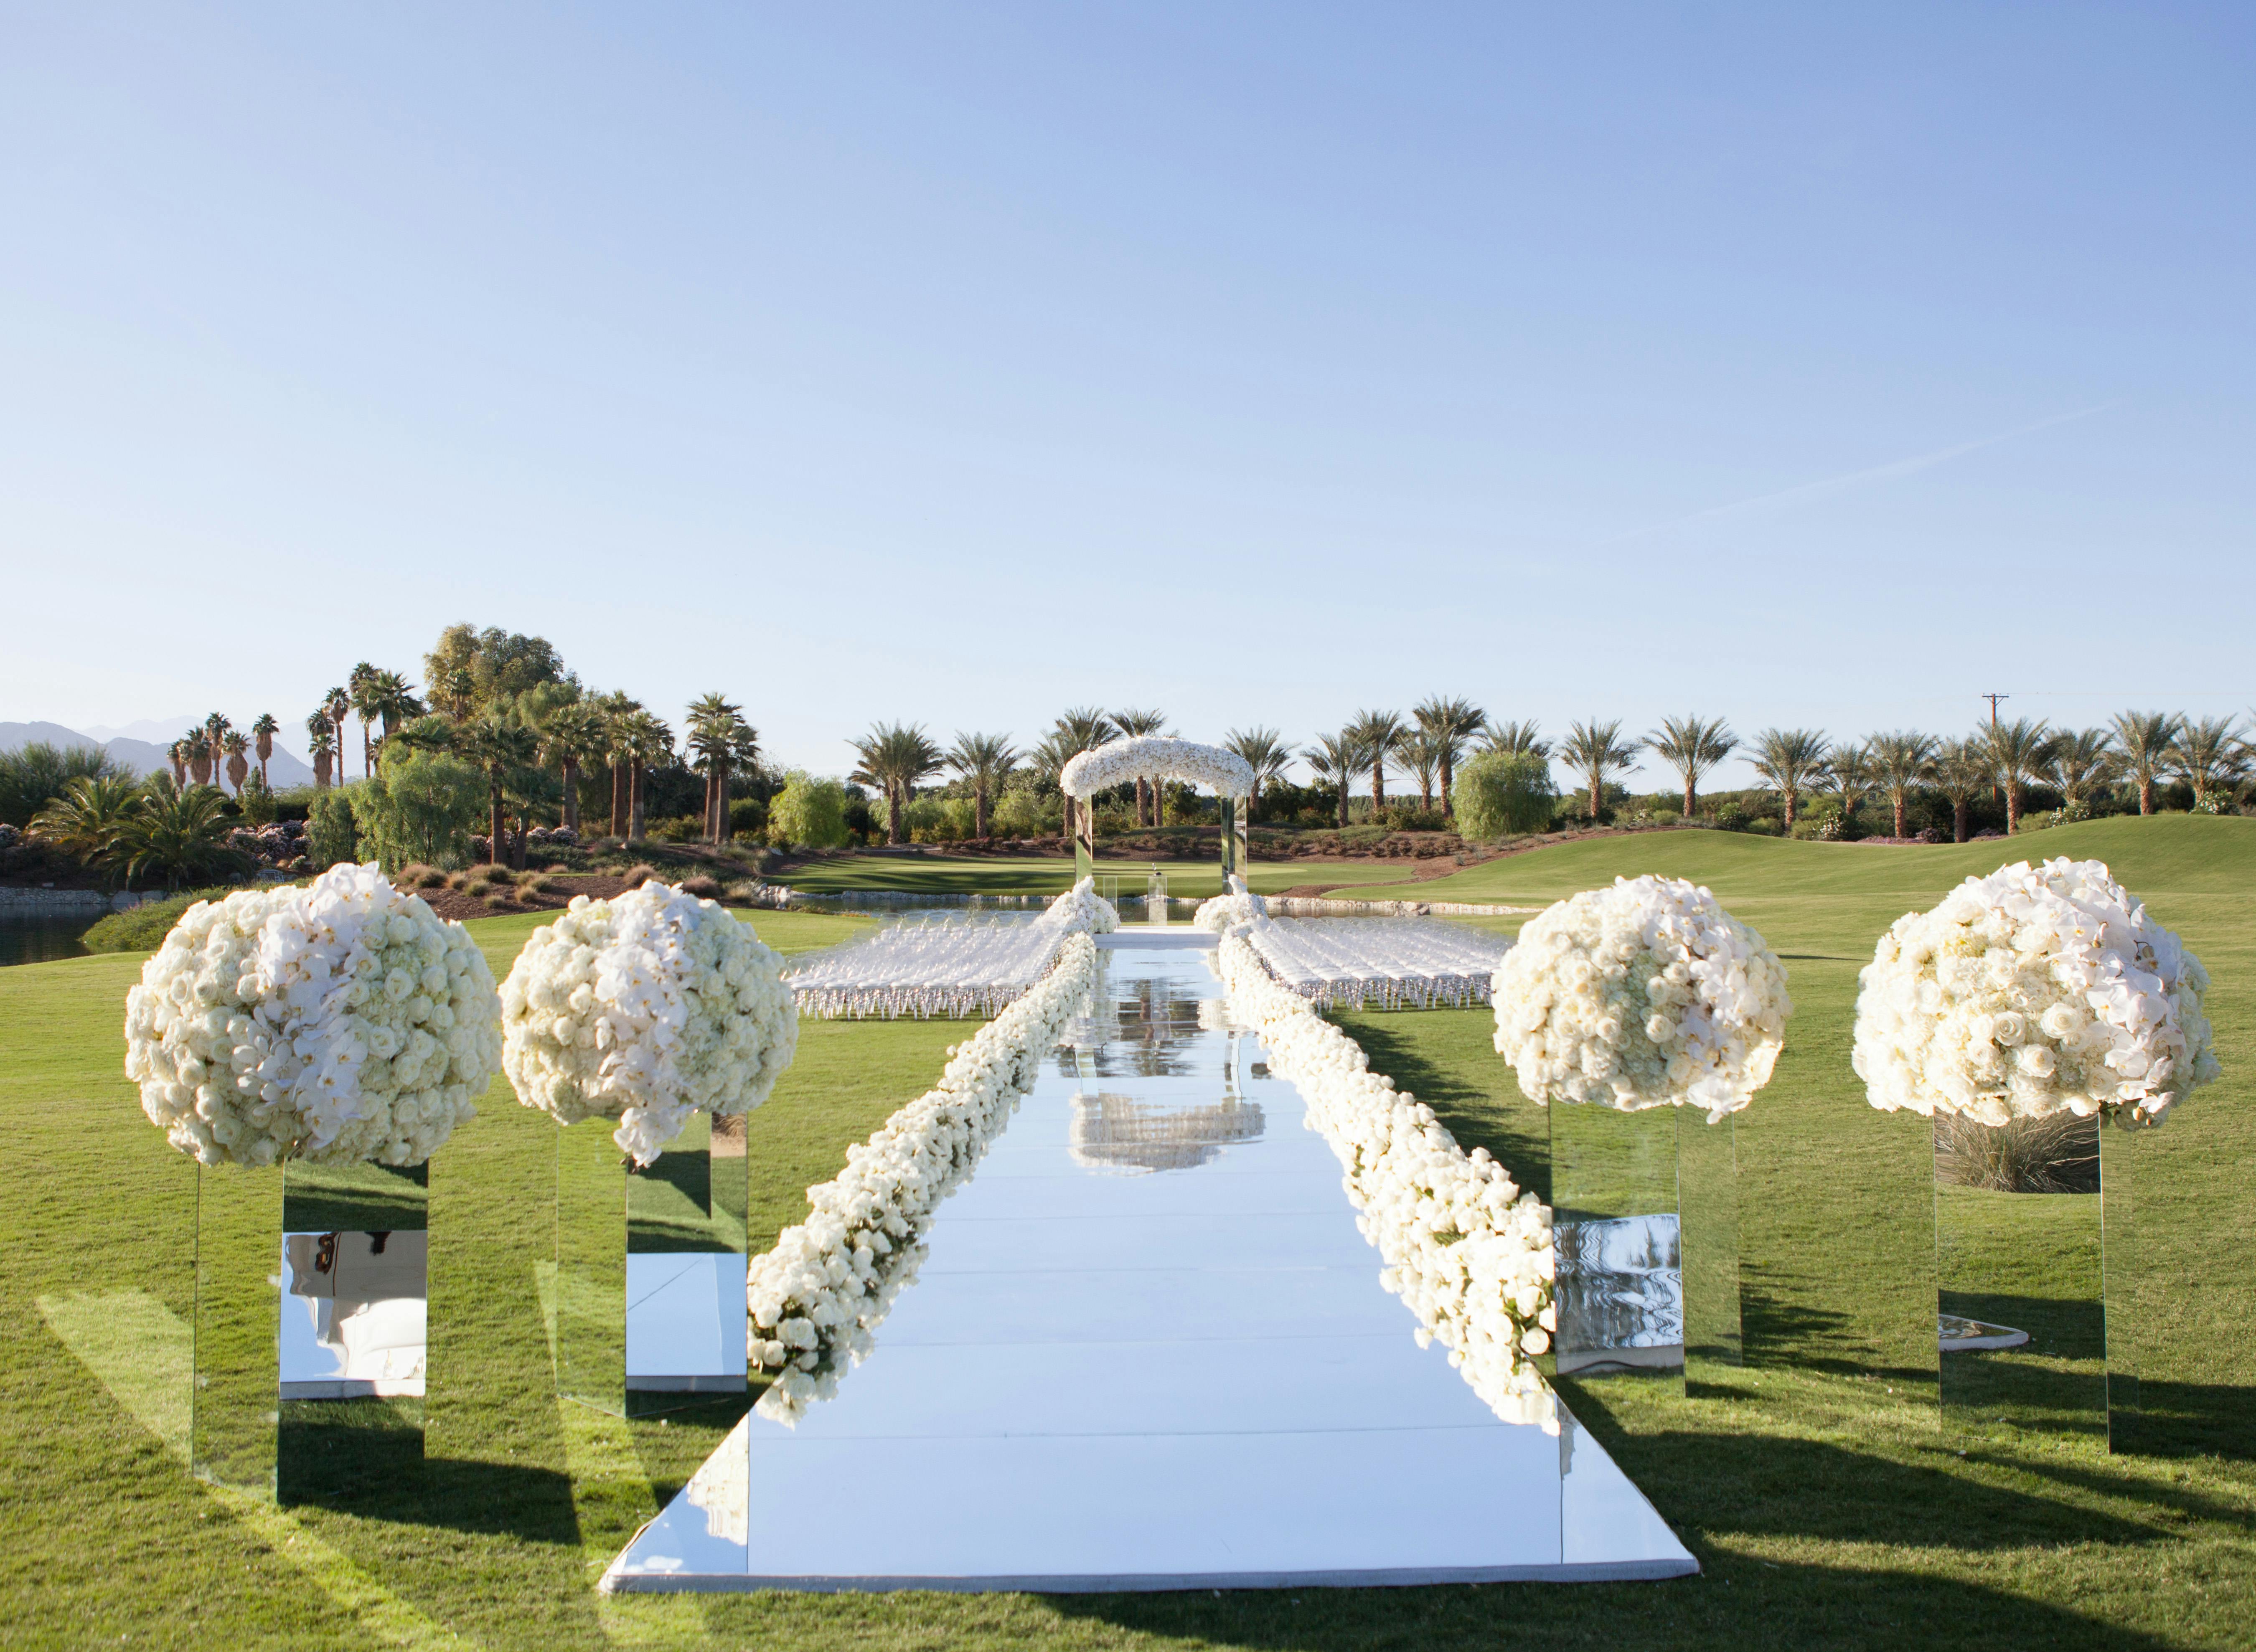 Mirrored wedding aisle with white flowers on mirrored bases in a grassy field | PartySlate